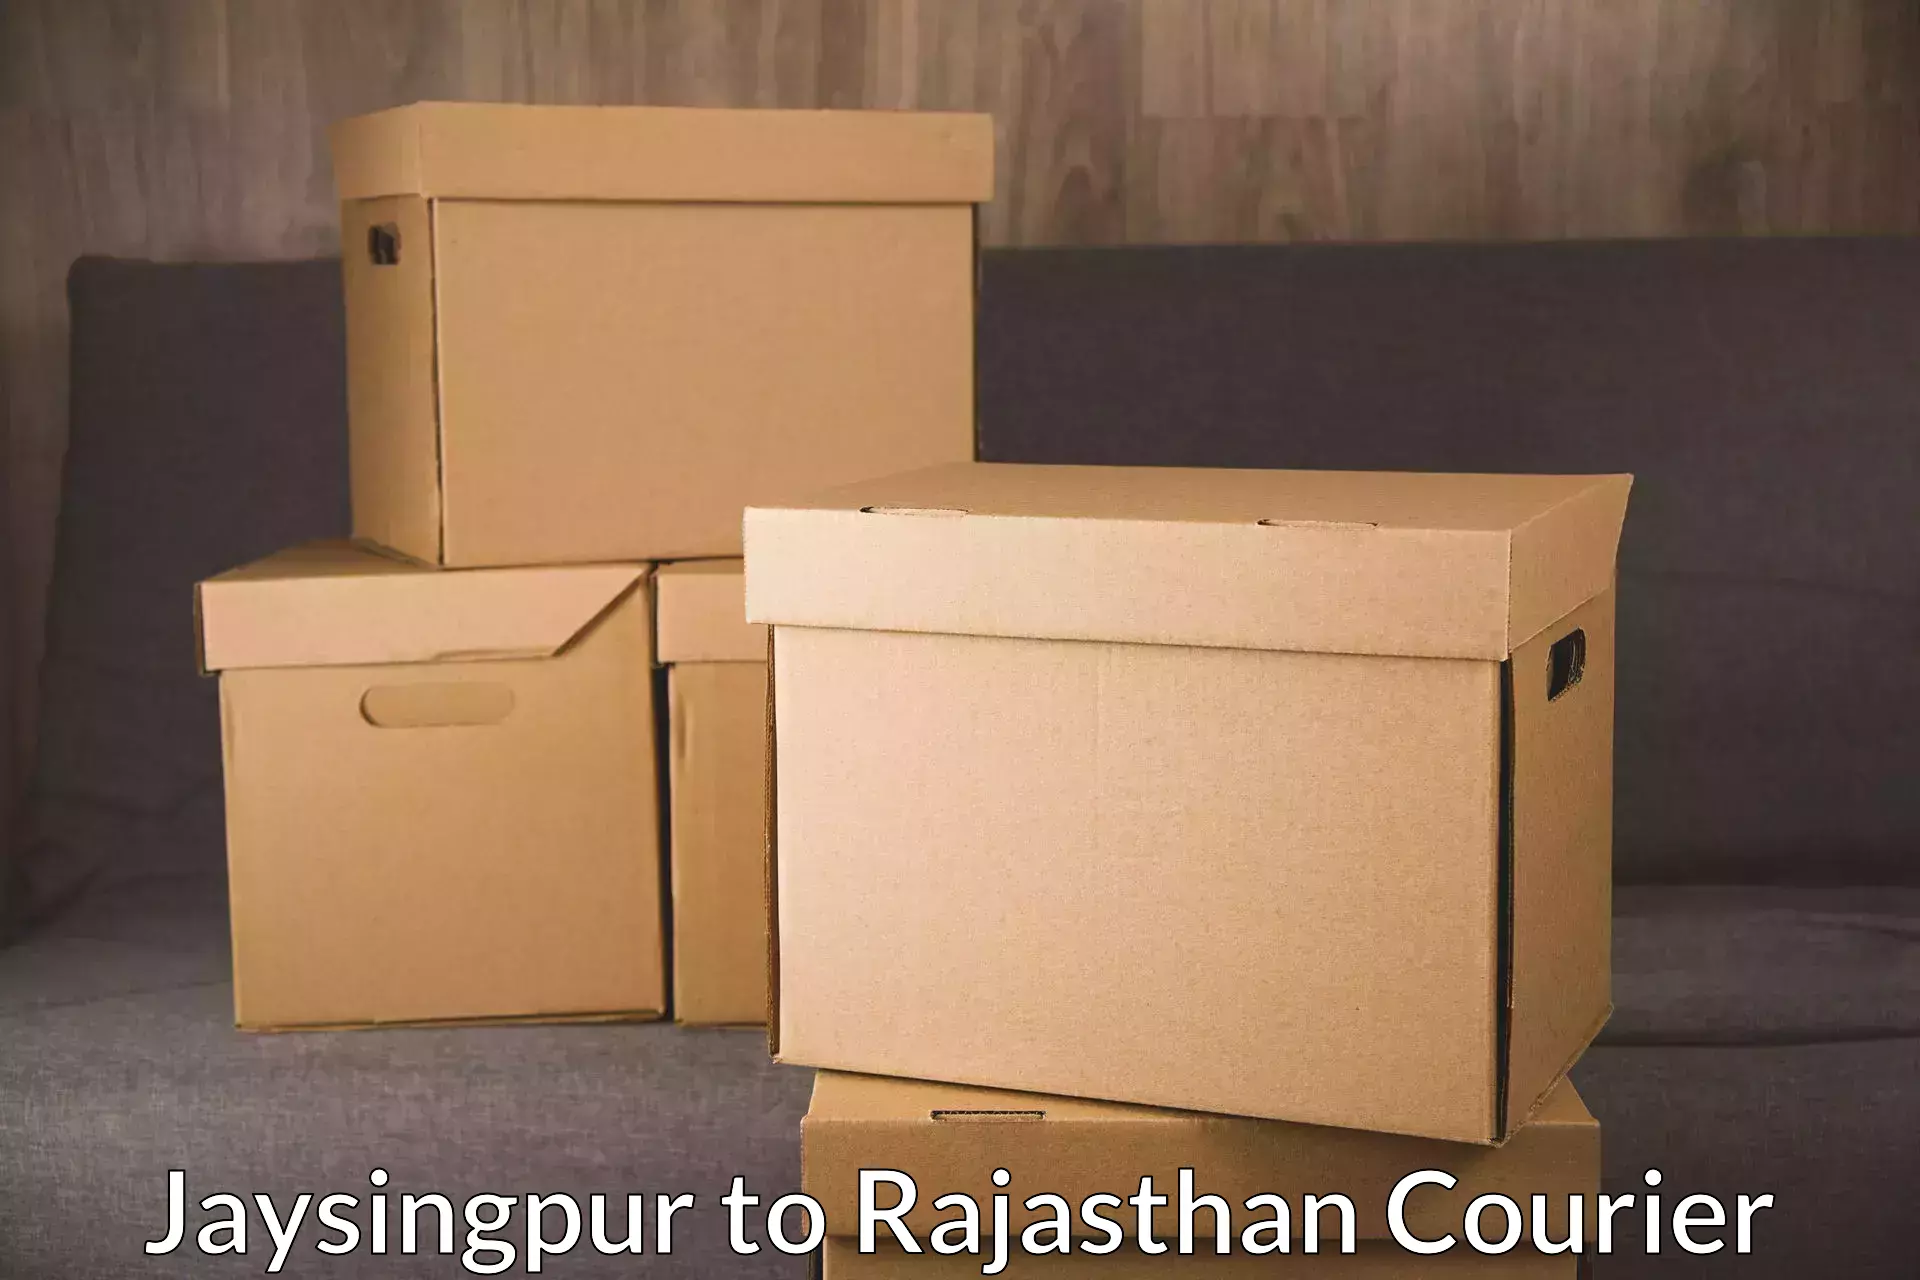 Express postal services in Jaysingpur to Dholpur